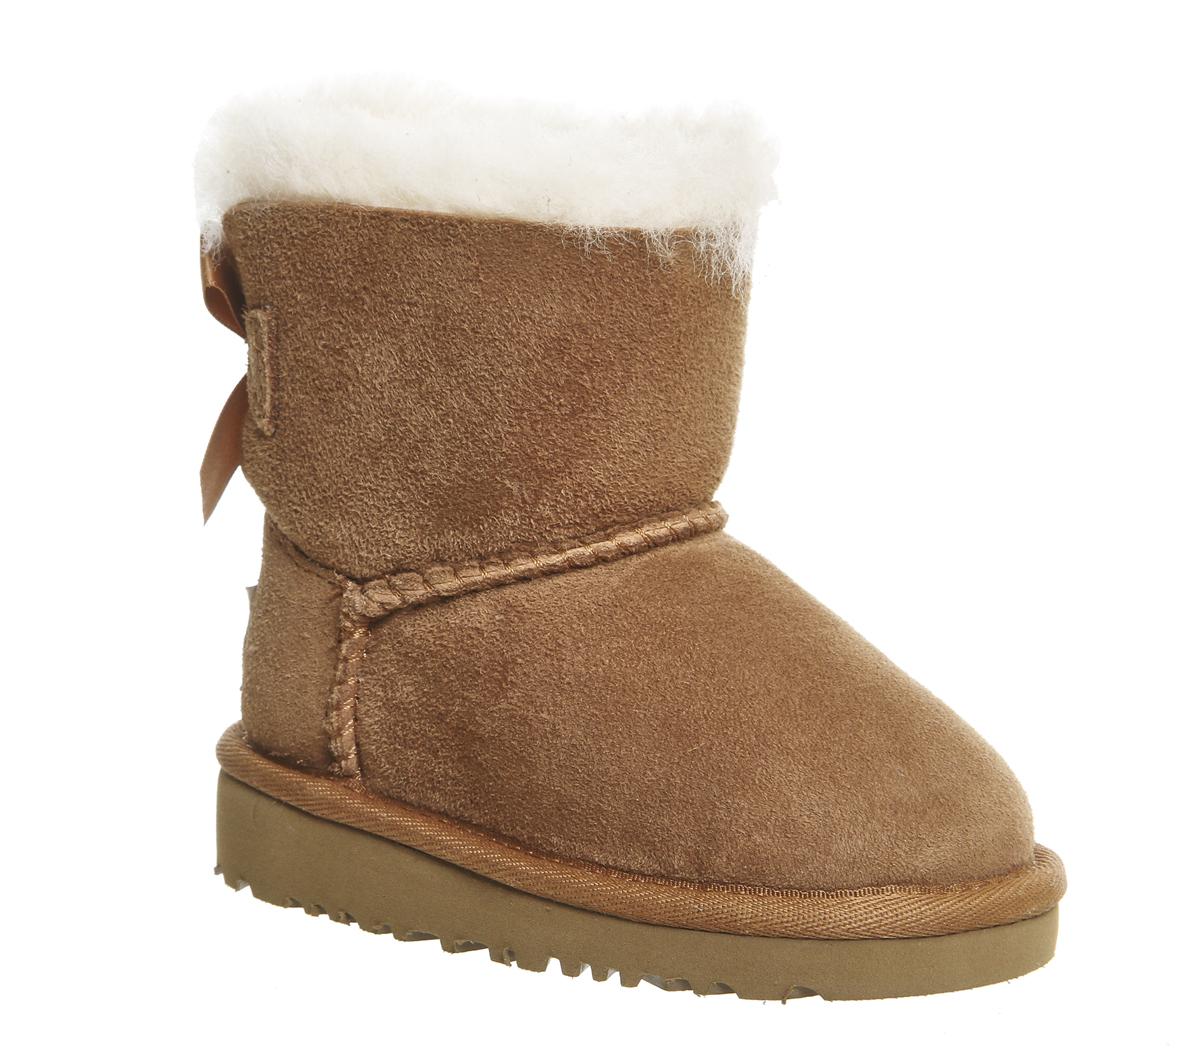 girl ugg boots with bows